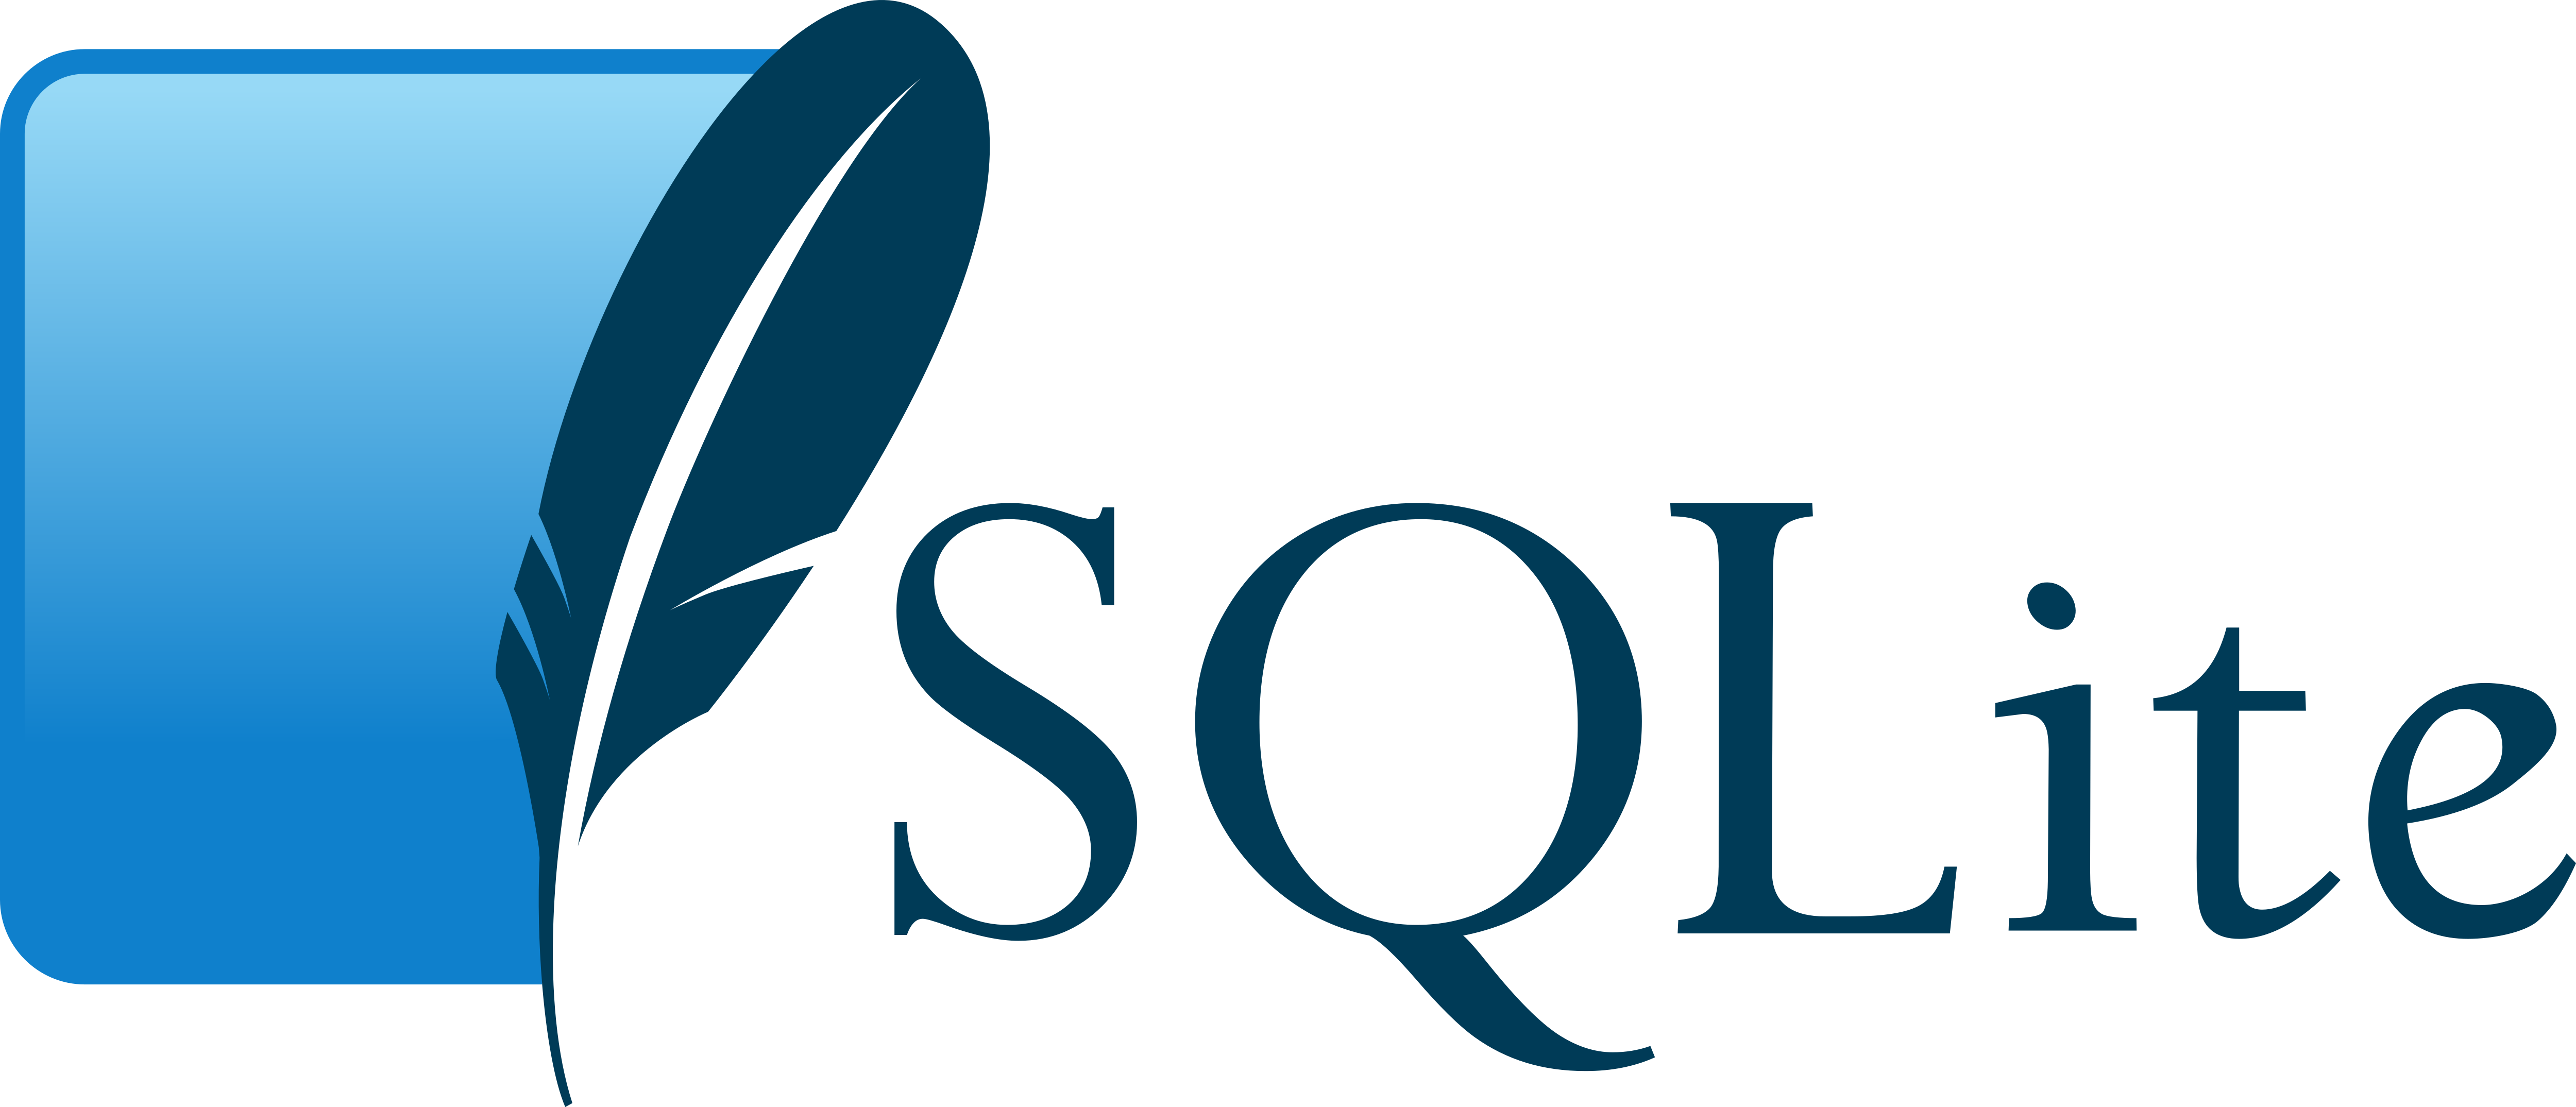 download the last version for ipod SQLite Expert Professional 5.4.62.606